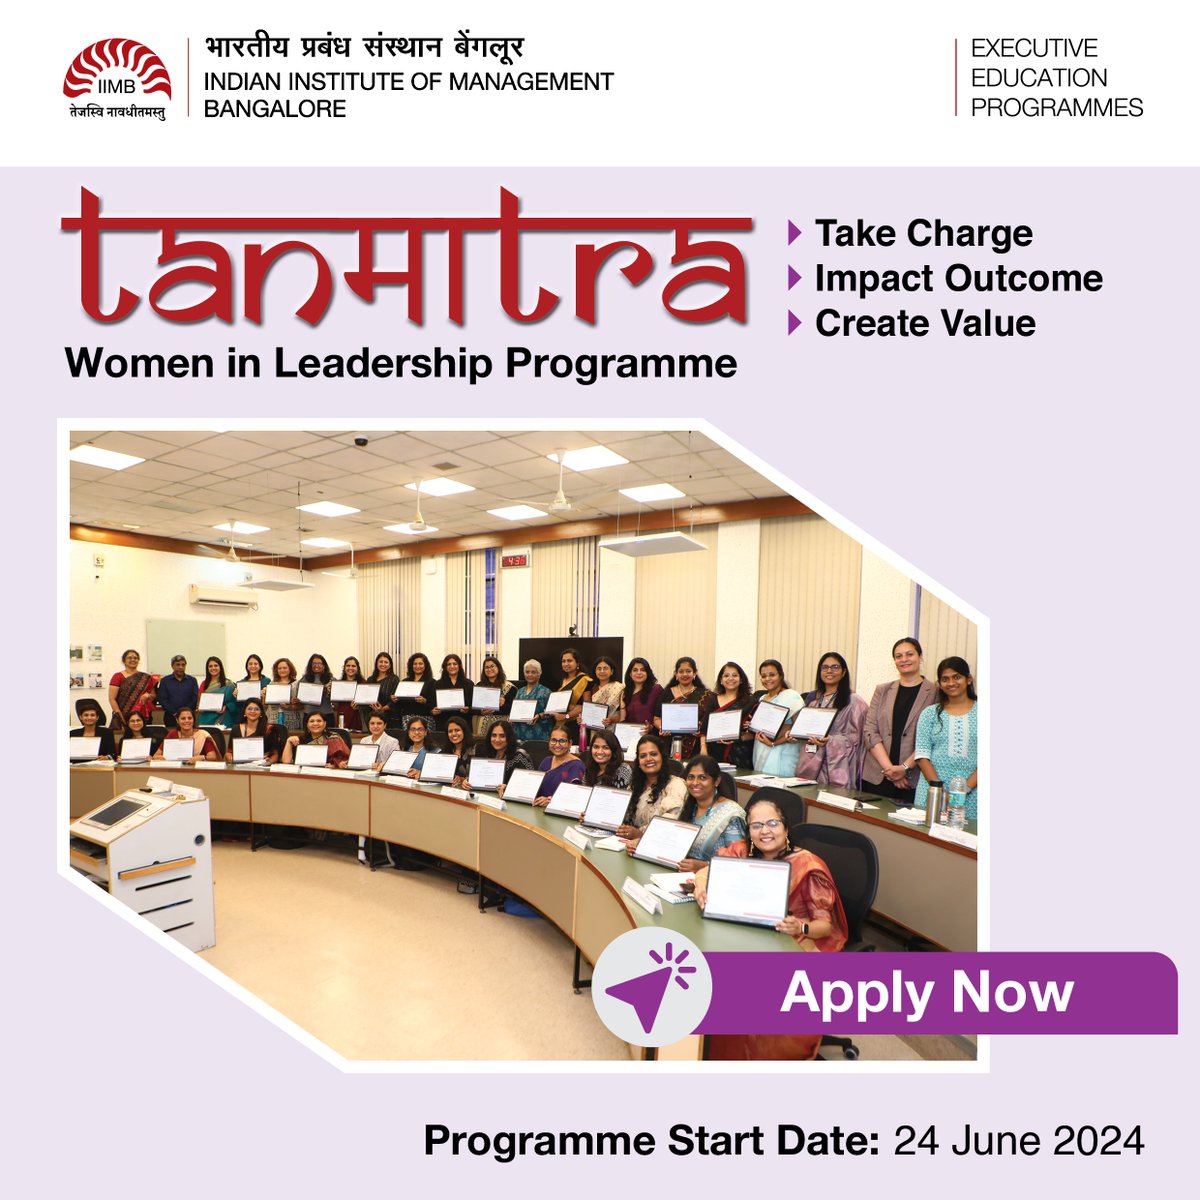 👩‍💼 #IIMB Executive Education is glad to open registrations for the 8th batch of '#Tanmatra-Women in Leadership' Programme. Learn more: lnkd.in/g-wZsrUA Registration closes on 15 May 2024! Apply soon! #executiveeducation #womeninleadership #leadershipdevelopment #tanmatra8